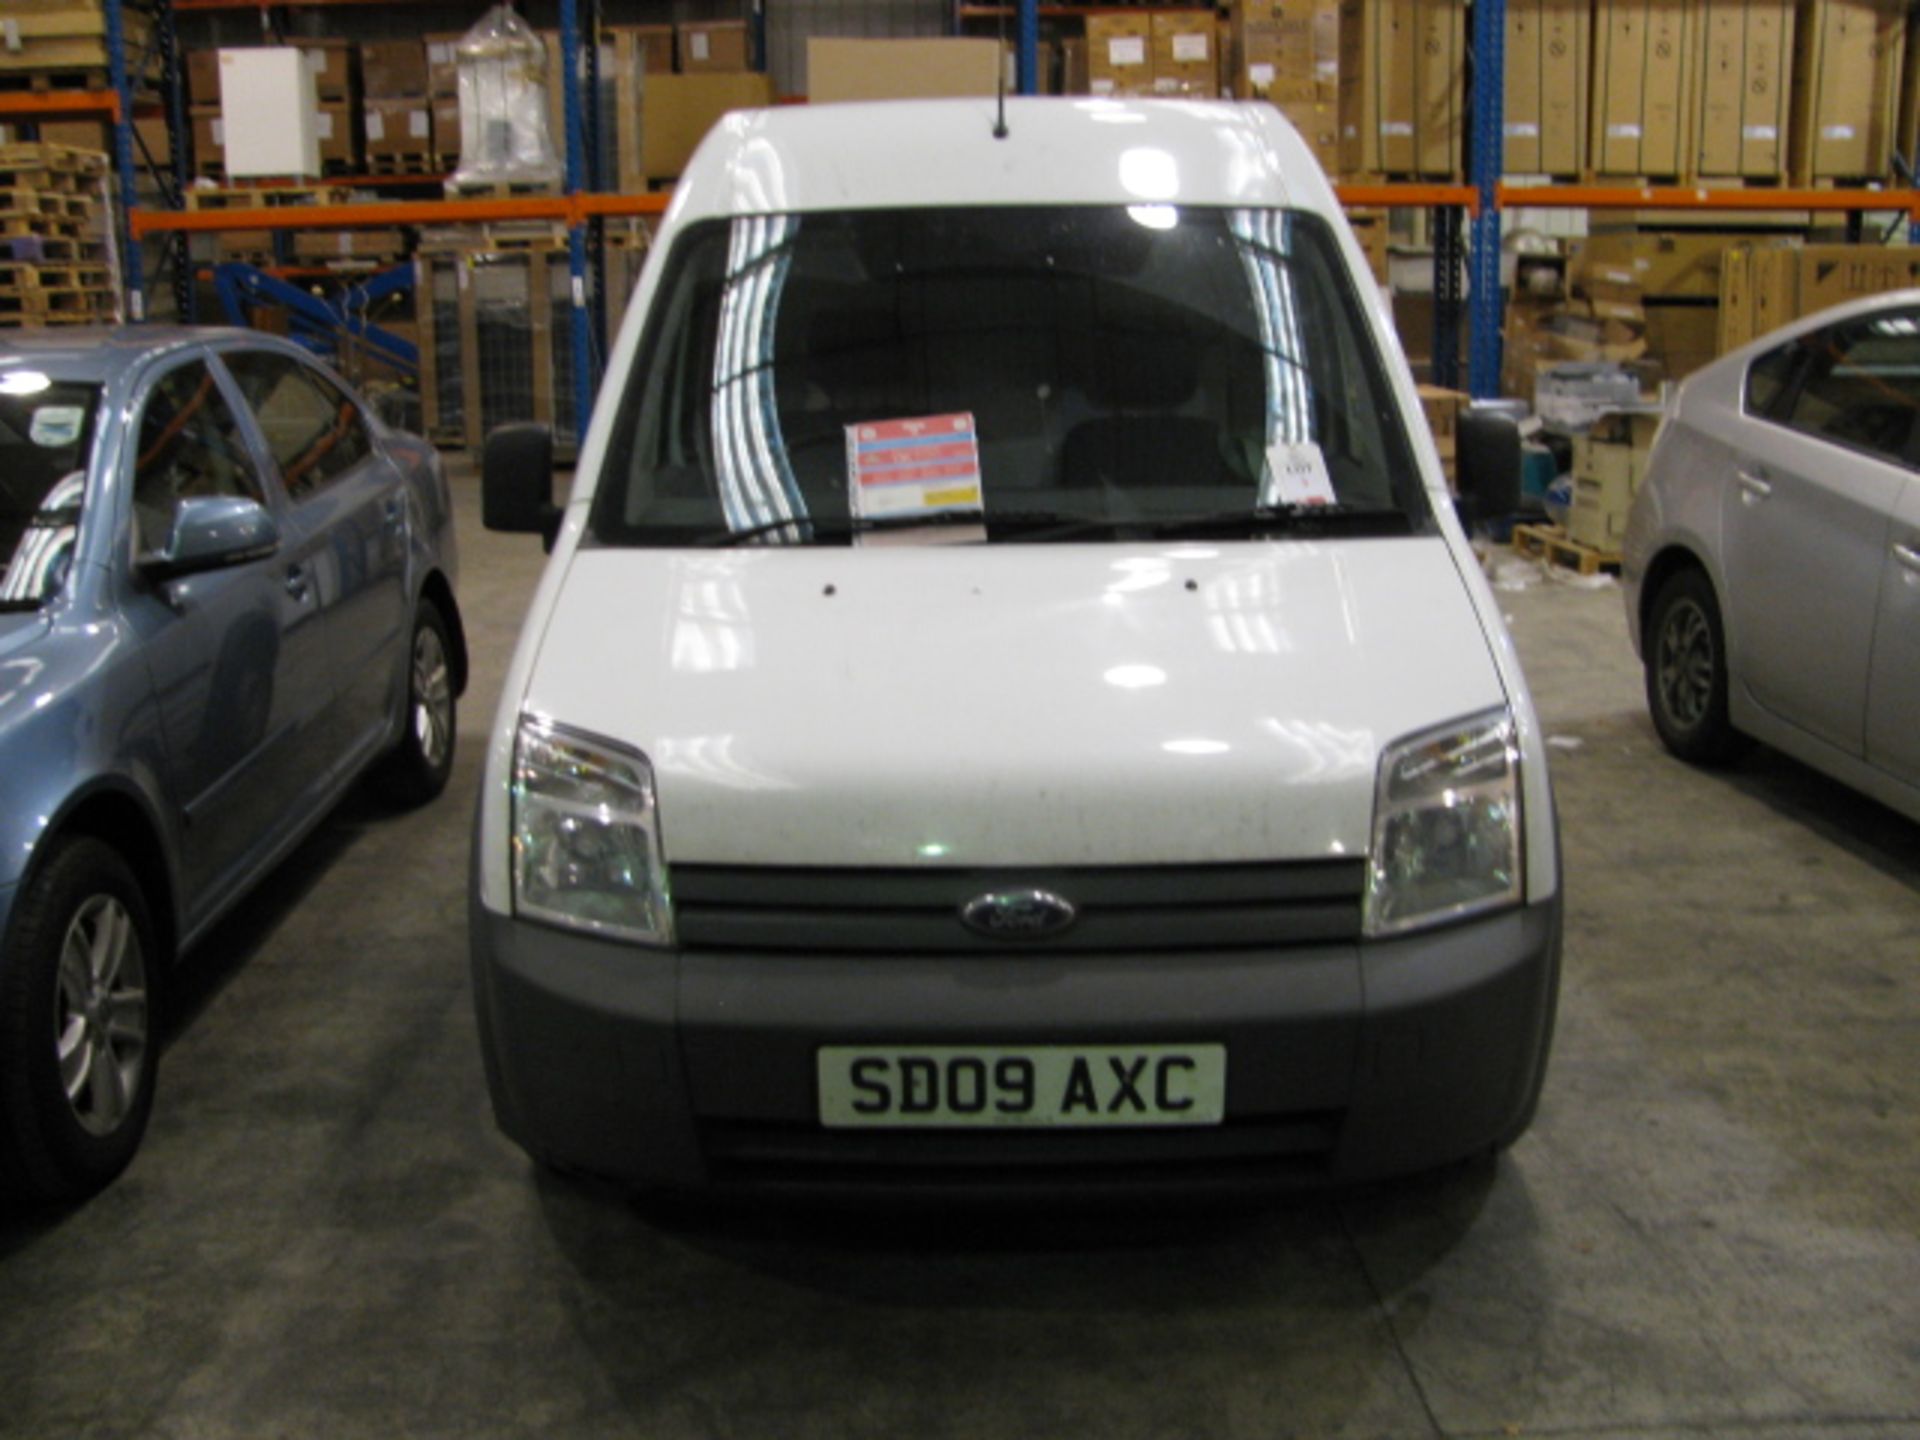 Ford Transit Connect 90T 230L reg SD09 AXC miles 68,427